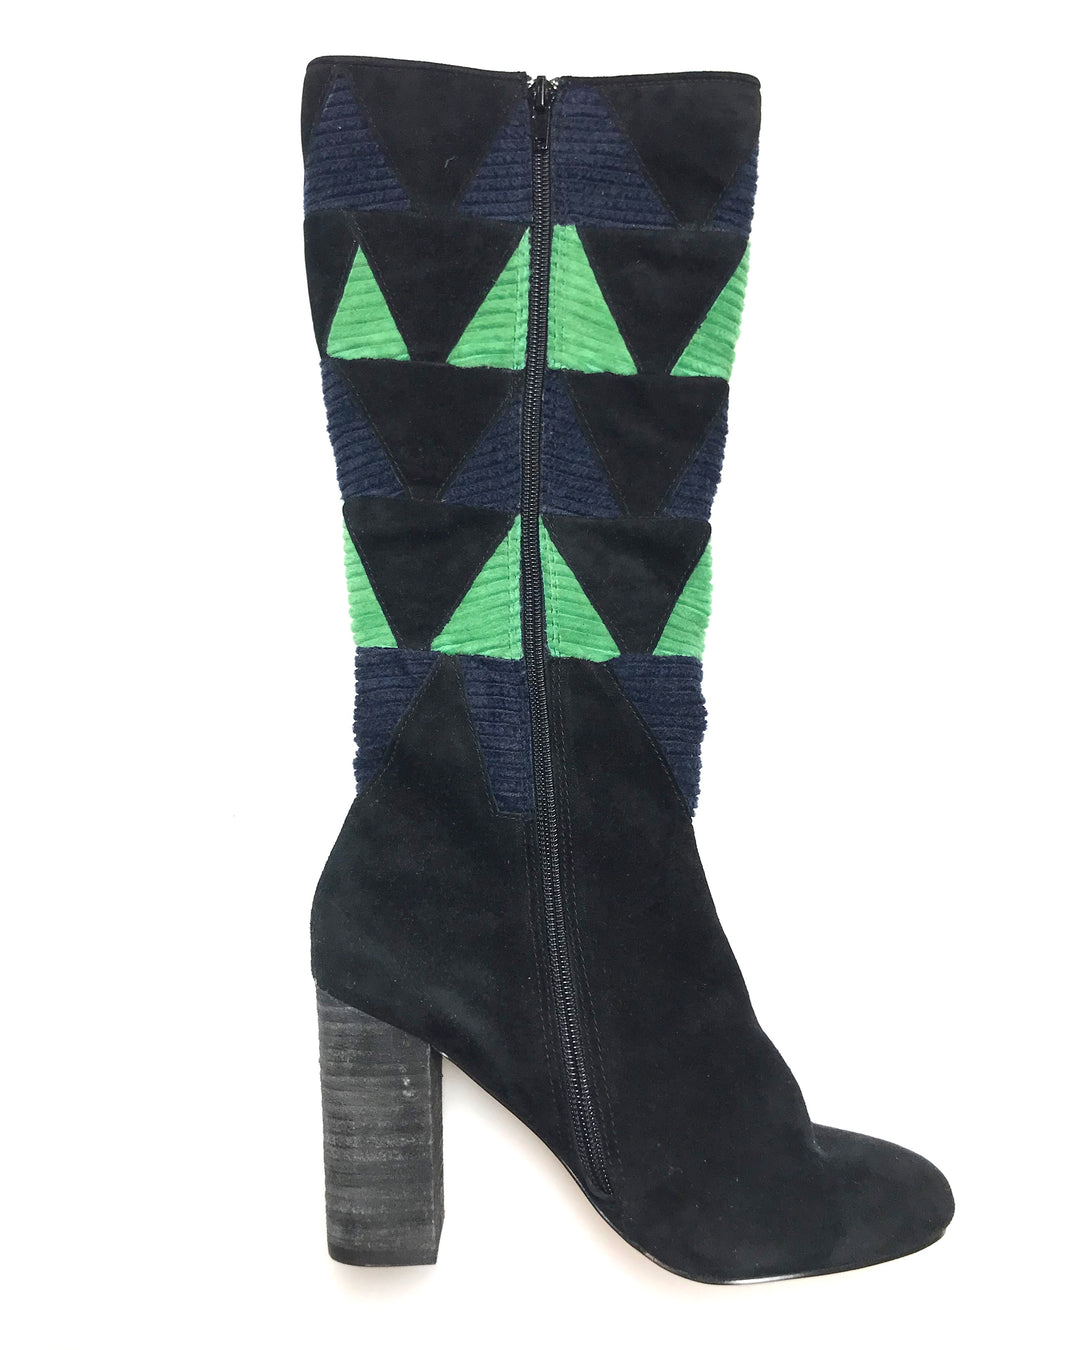 Black, Blue, and Green Boot - Size 6